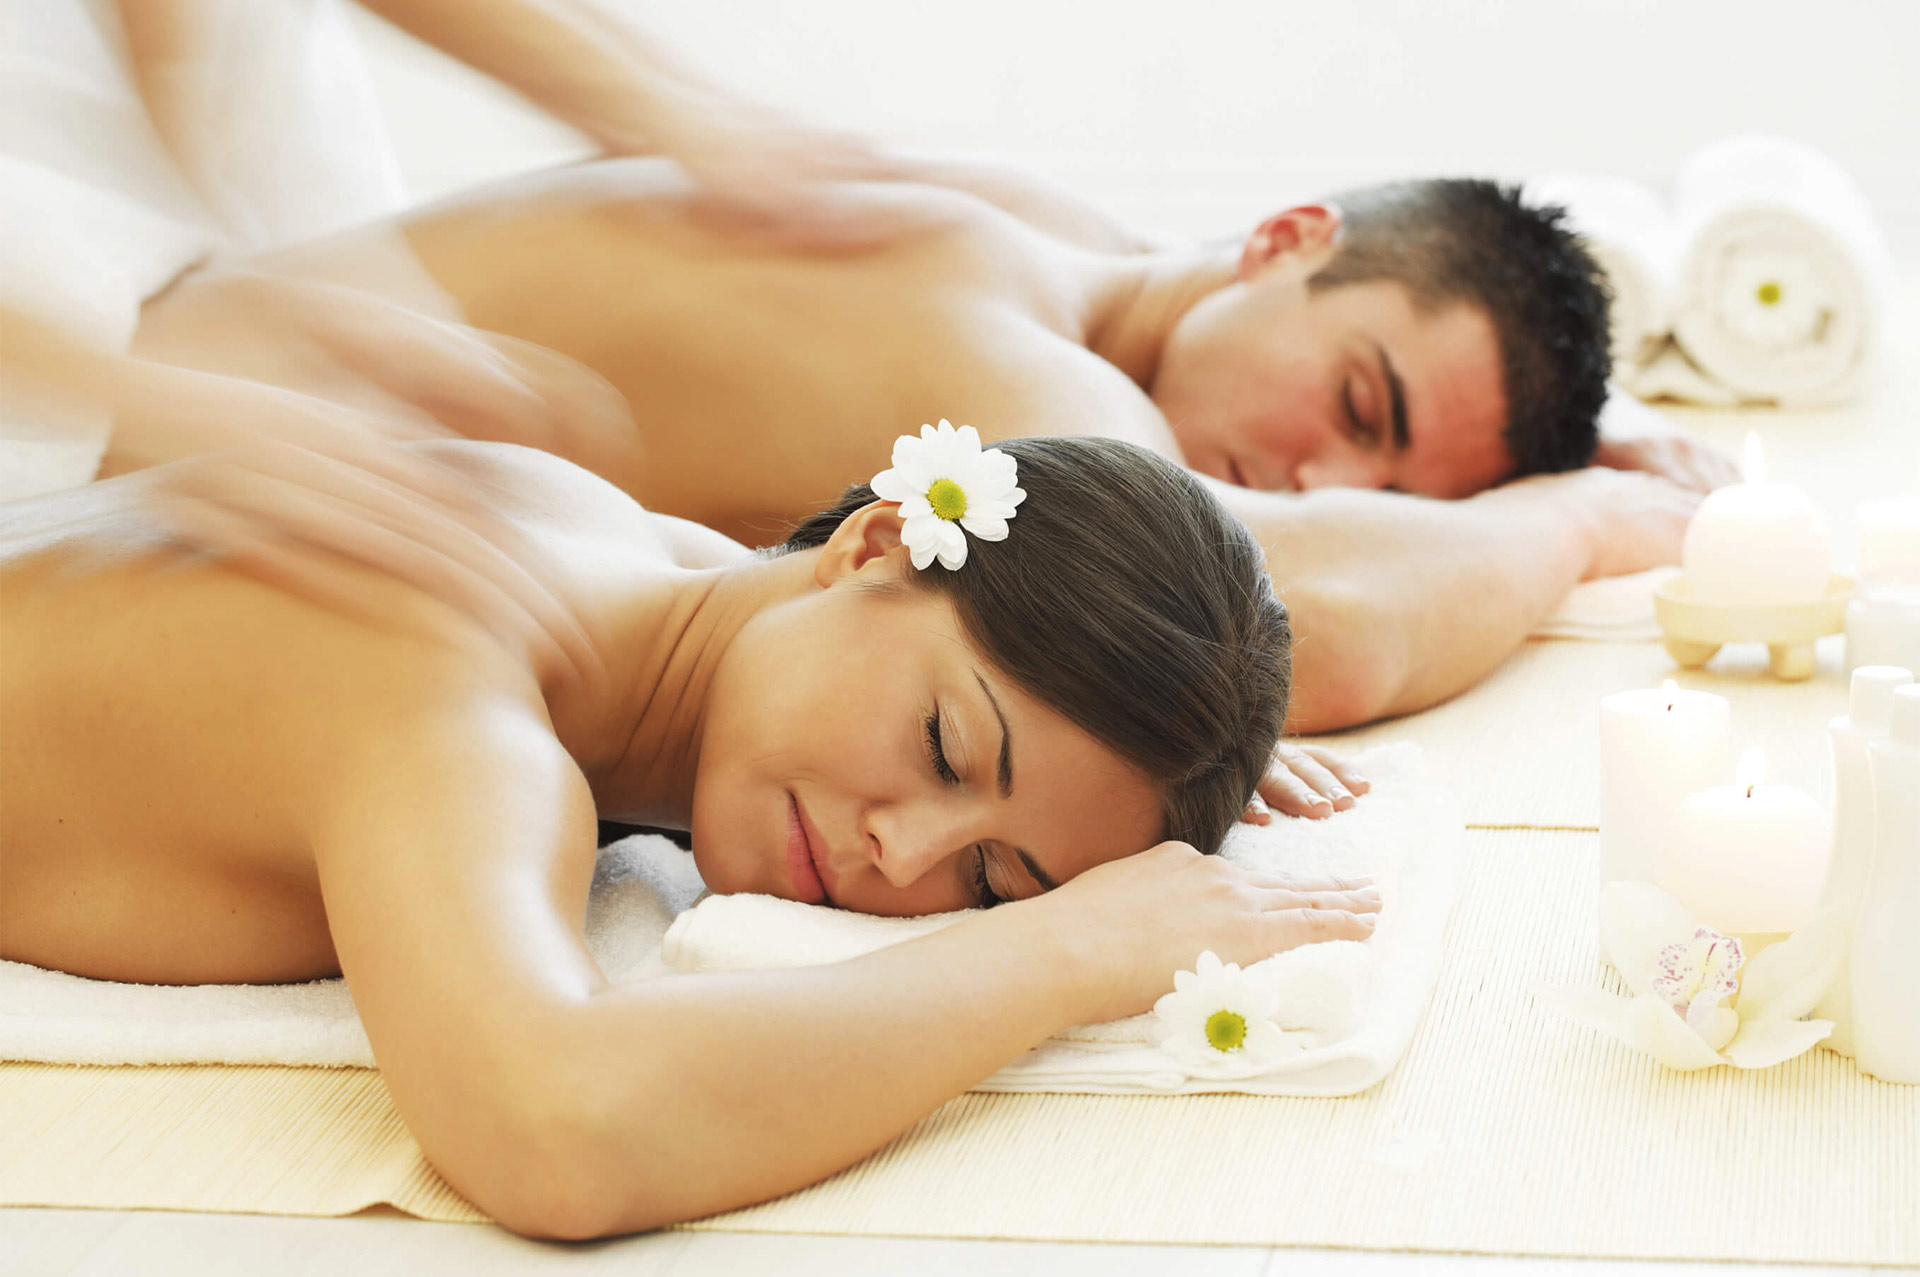 Our Services -- Deep Tissue, Swedish, Full Body and Hot Stone Massages